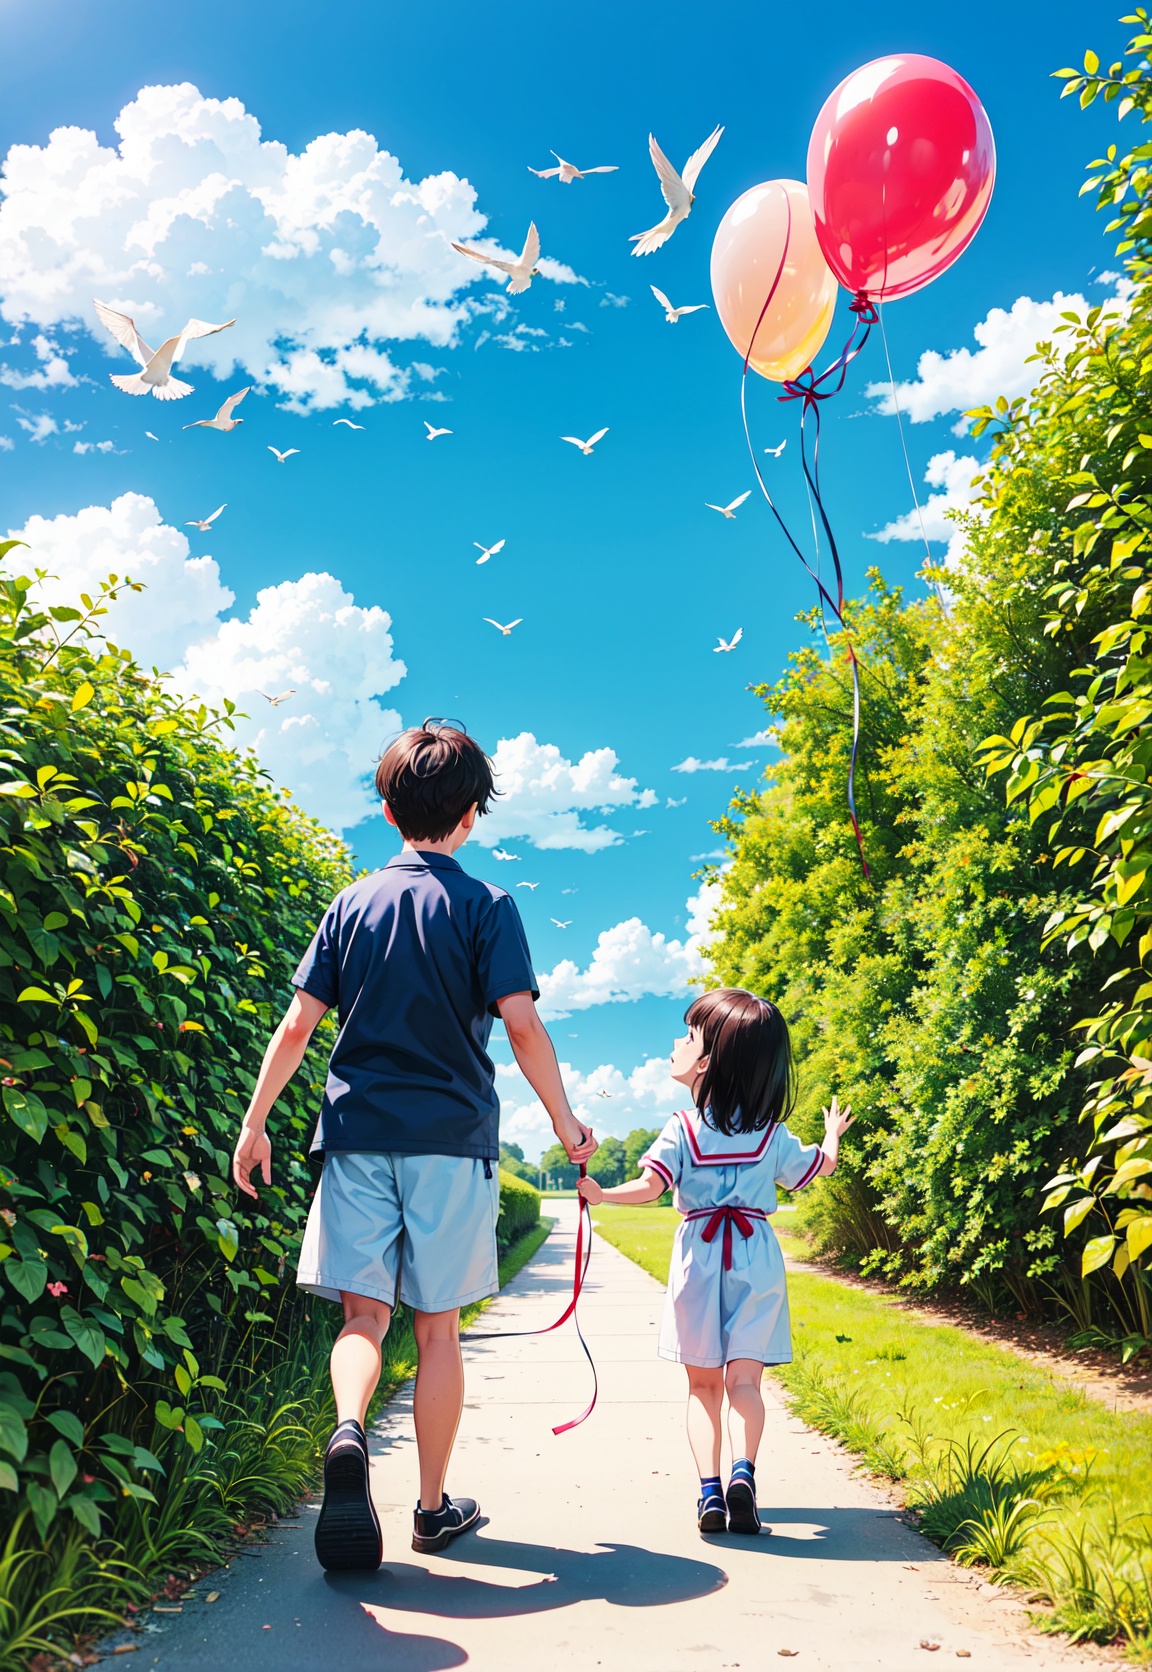 On Children's Day, a cute little girl and a little boy walked in a school covered in balloons. The school is filled with flowers. Colorful ribbons, blue clouds in the sky, and birds. Ultra detail, ultra detail, ultra high definition